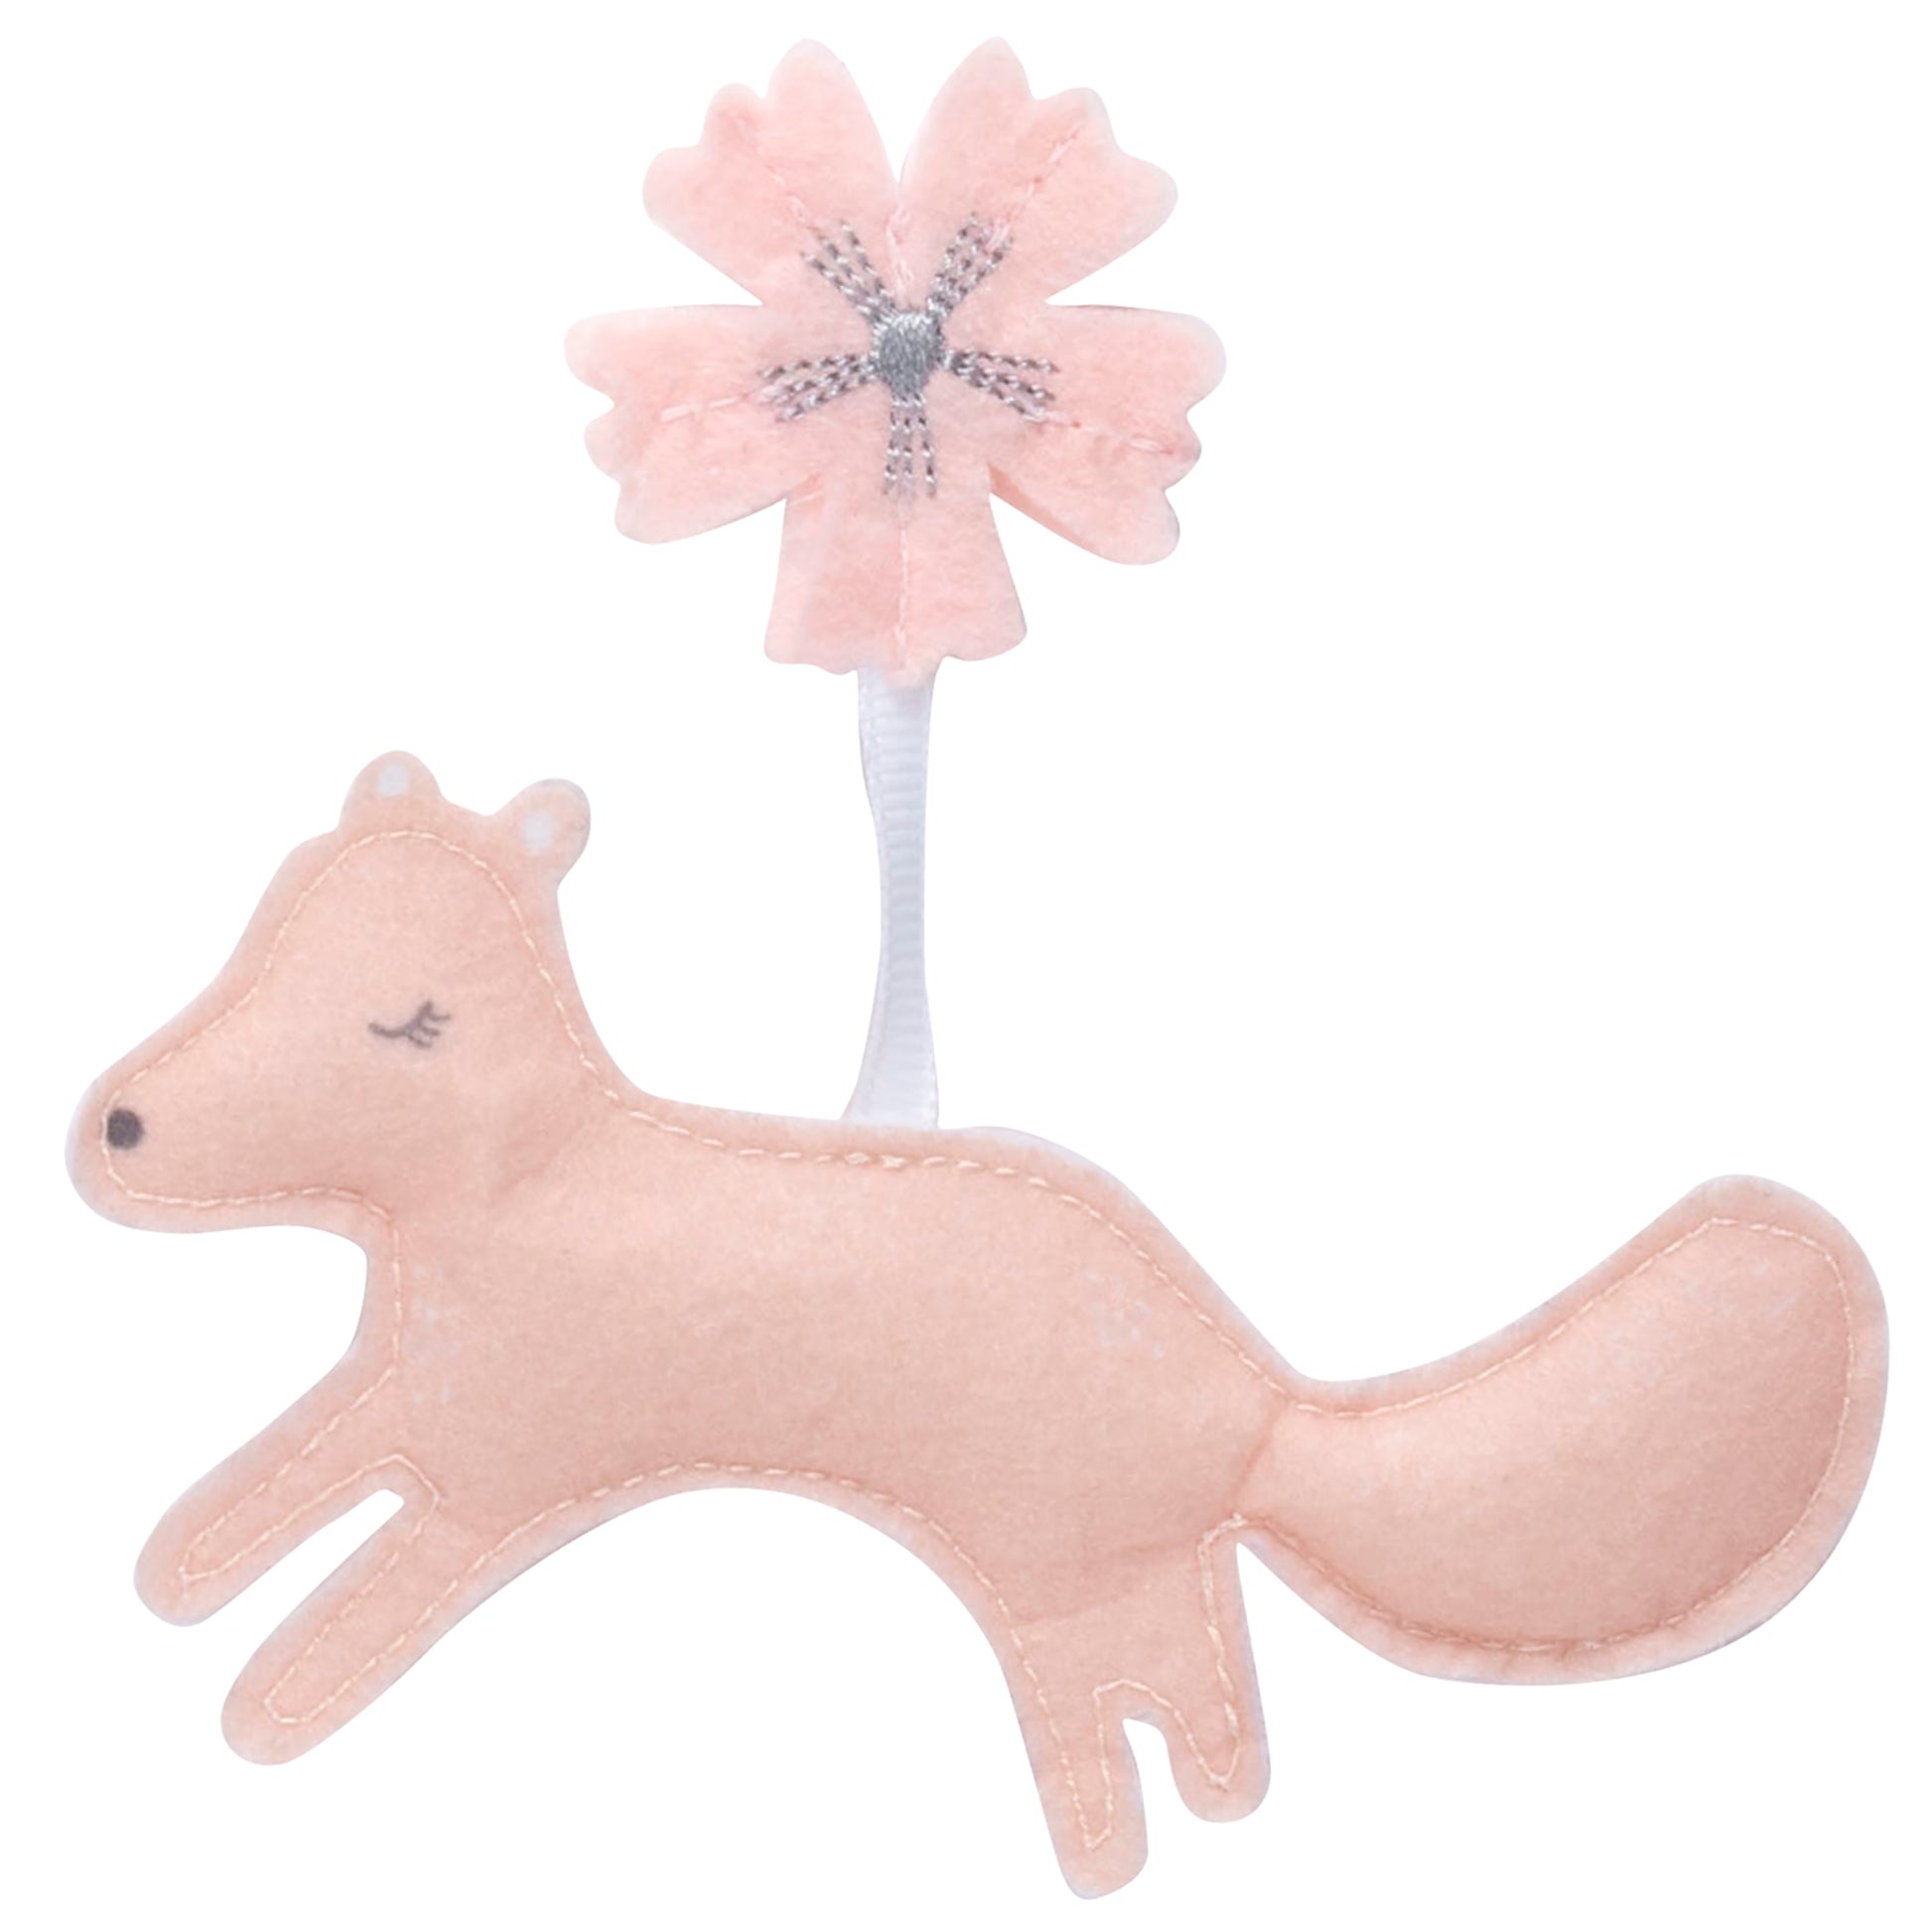  Forest Garden Musical Crib Baby Mobile deer felt piece in peach with a flower